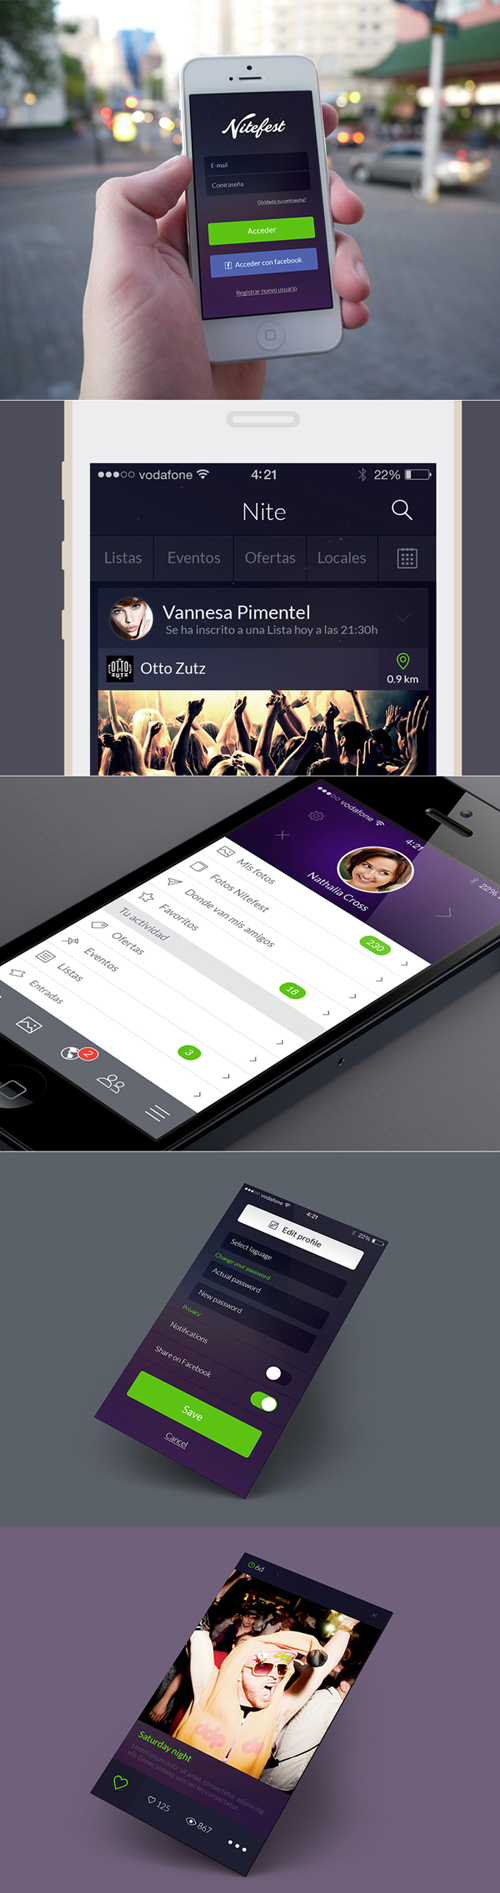 Amazing Mobile App UI Designs with Ultimate User Experience - 49